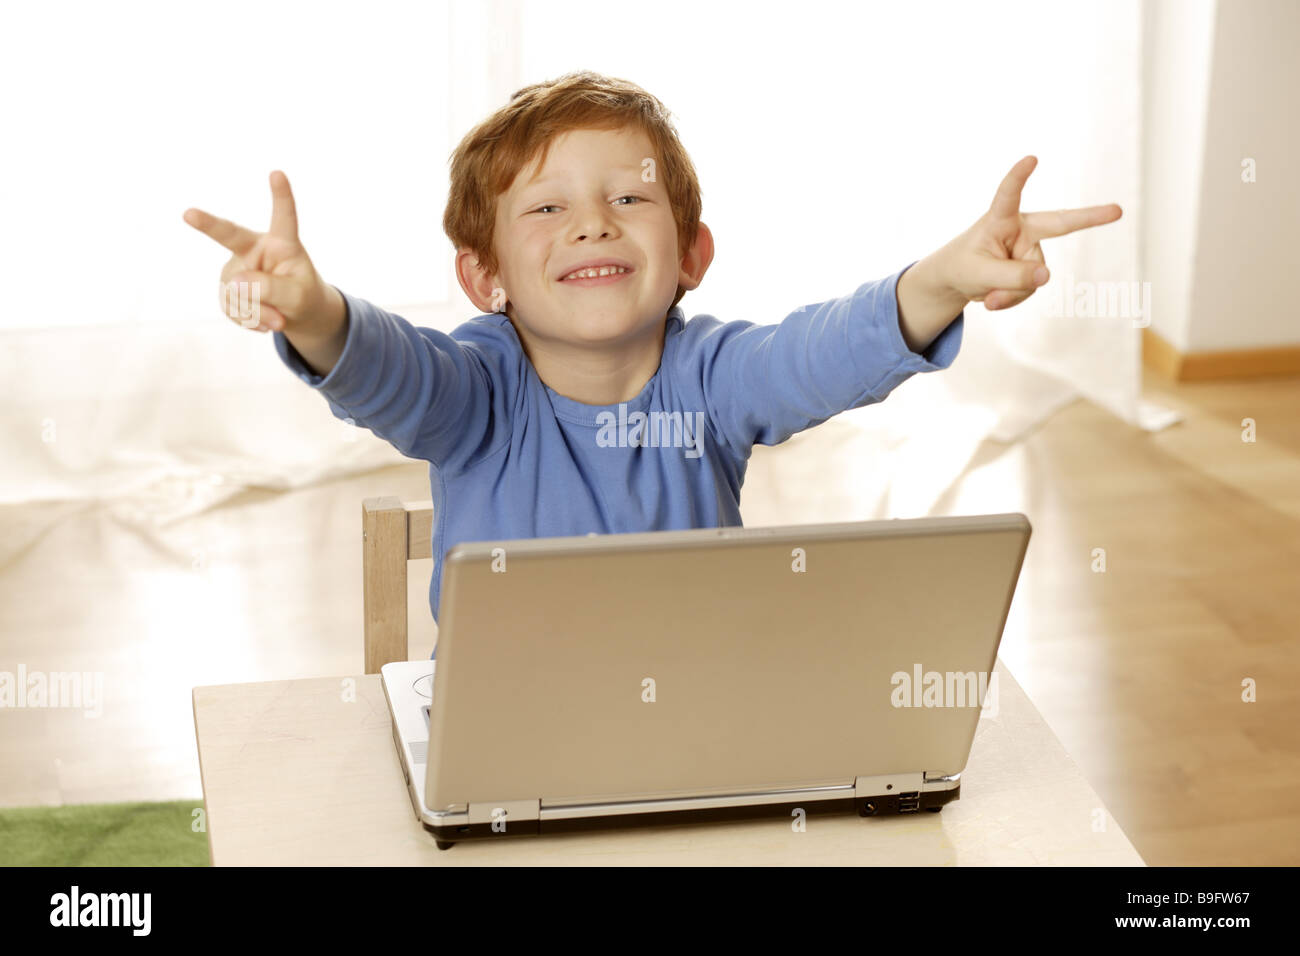 boy Notebook smiling  gesture V-Zeichen detail series people child red haired cheerfully joy contentment computers wireless Stock Photo